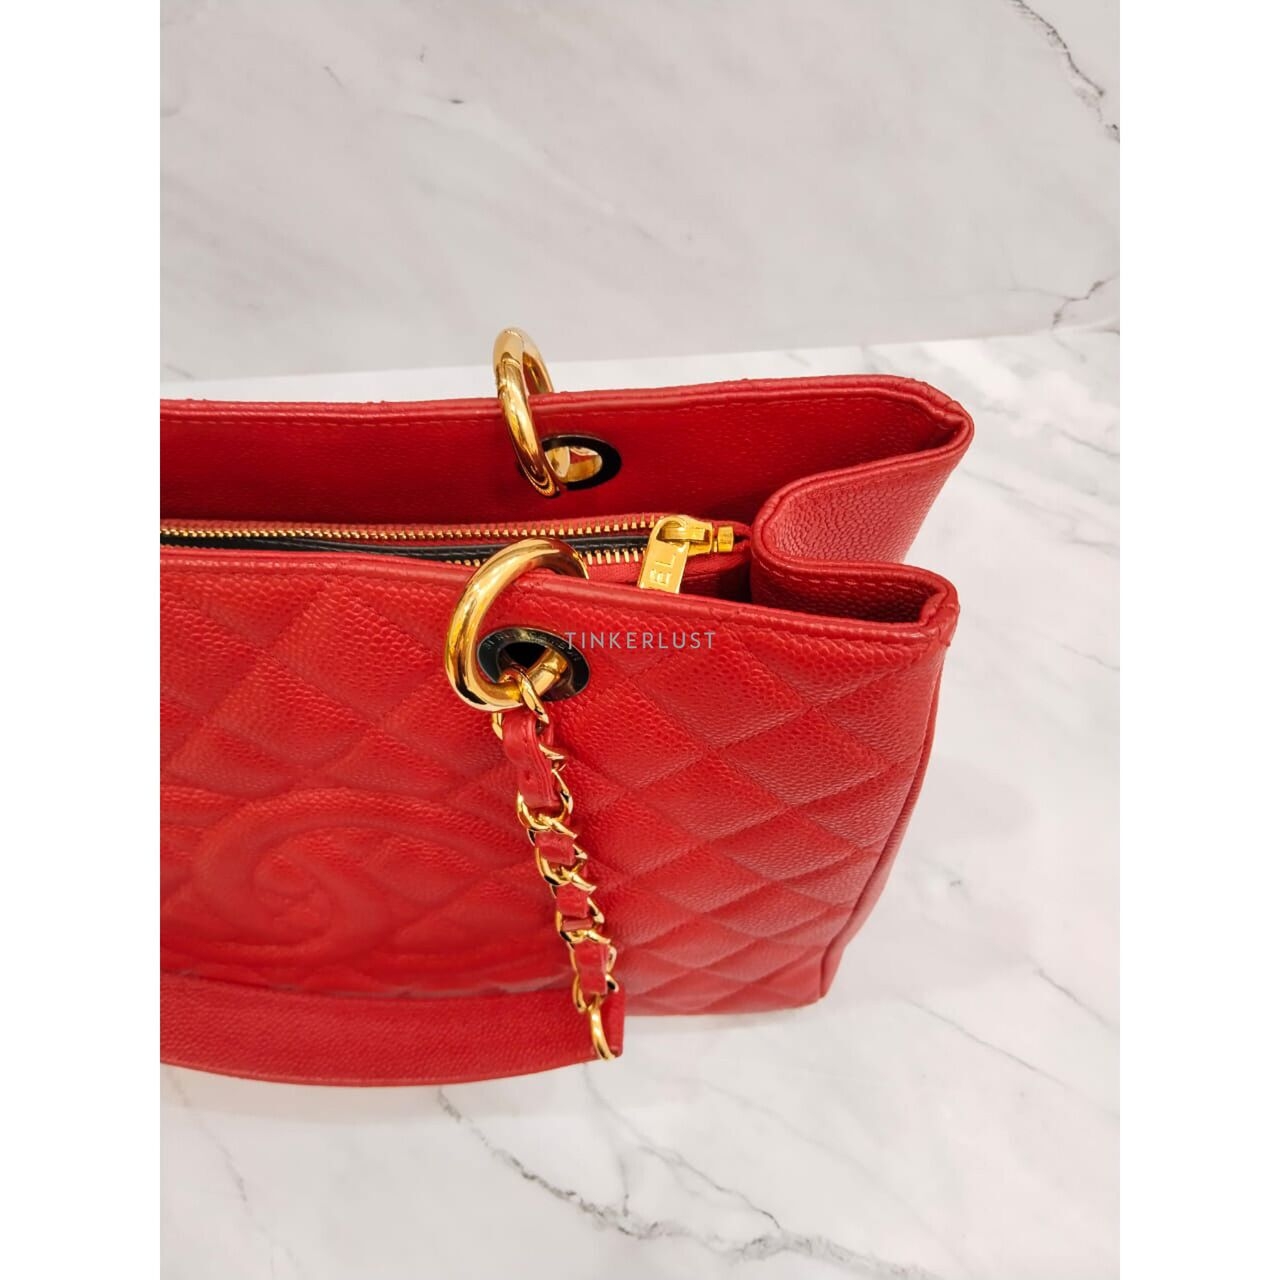 Chanel GST Grand Shopping Tote Red #18 GHW Tote Bag